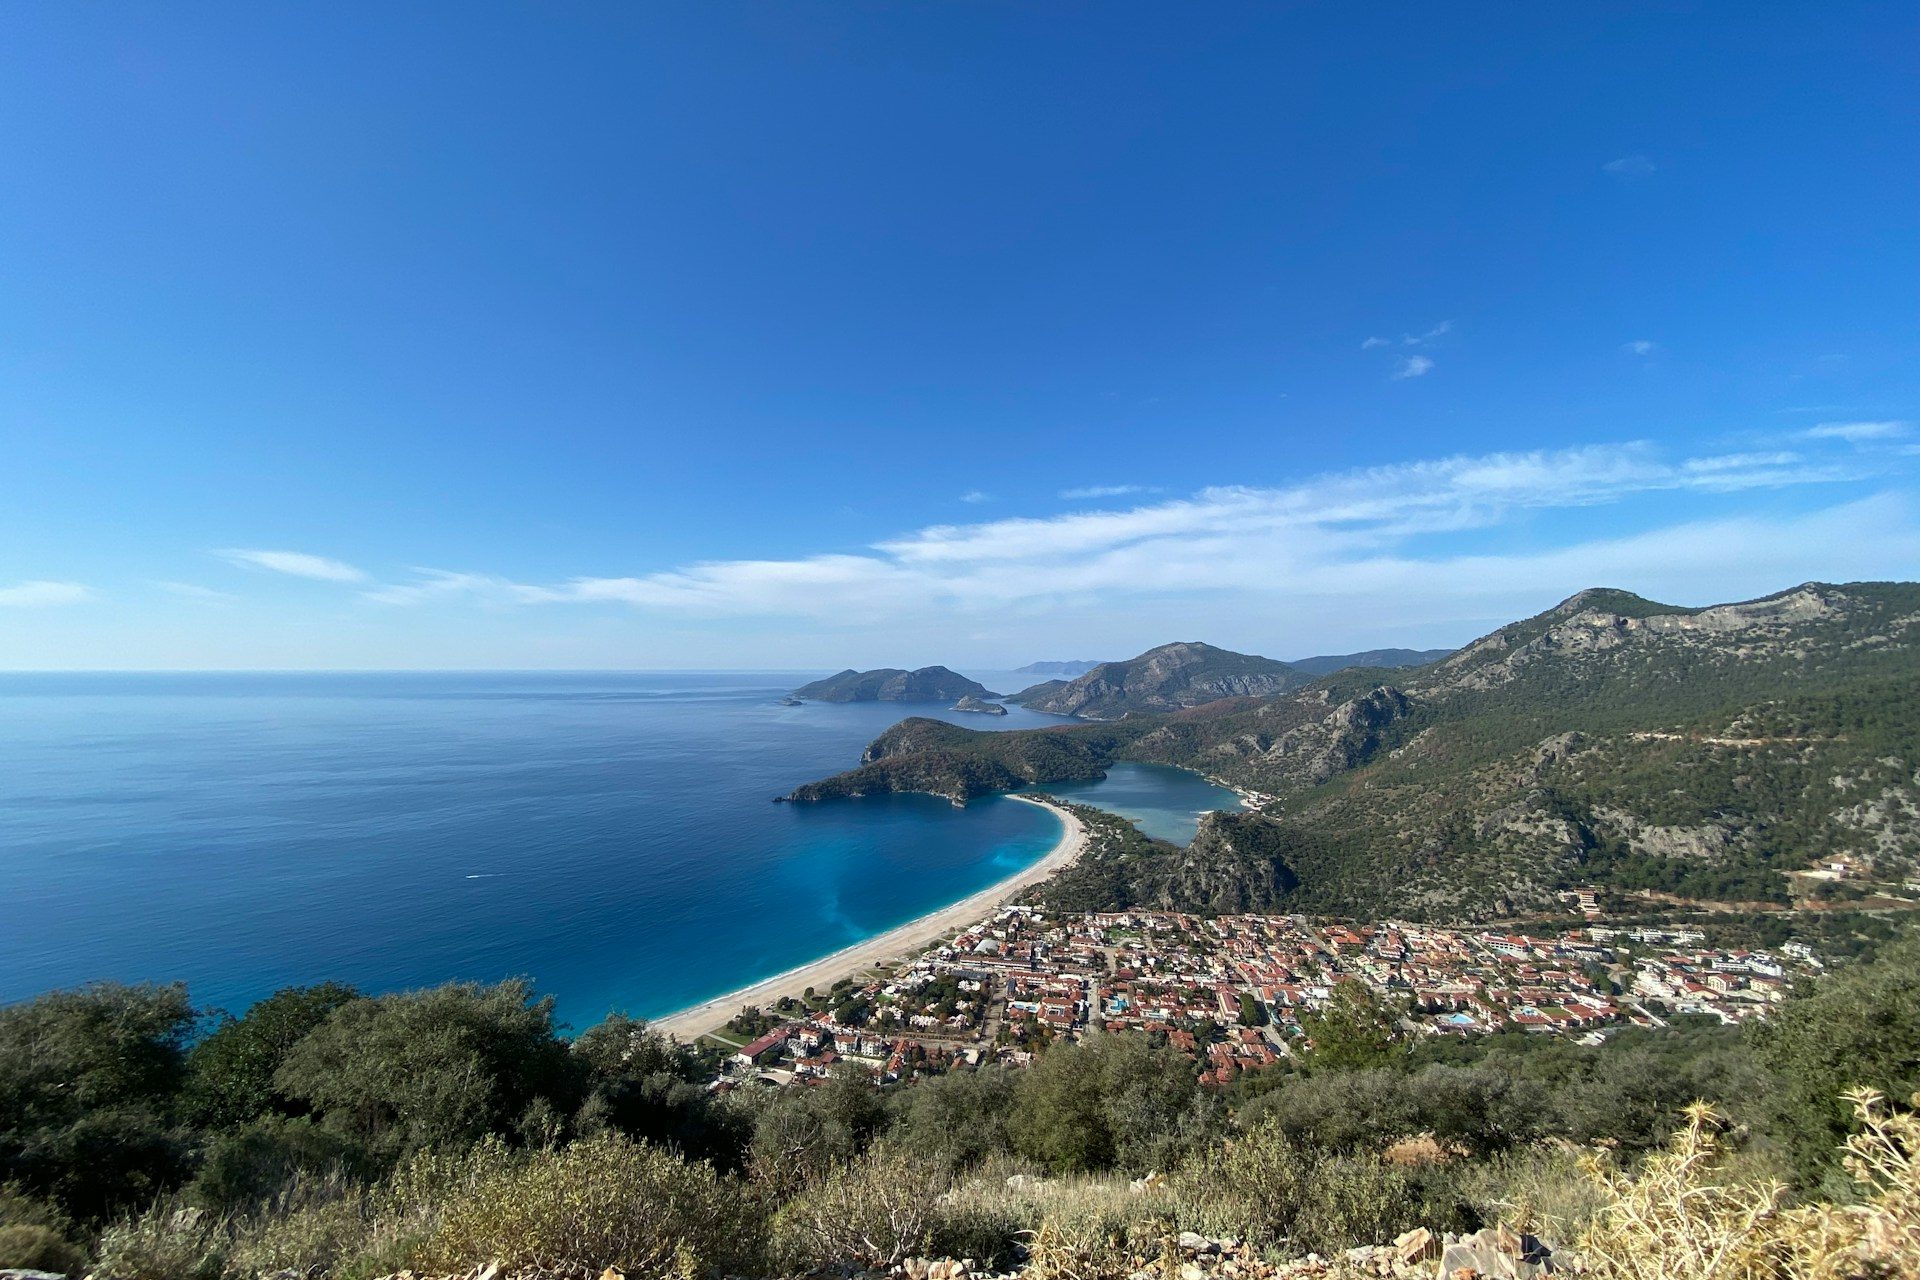 <p>This seaside resort town in the southwestern district of Fethiye is famous for its Blue Lagoon of stunningly beautiful turquoise water. The lake is among the many natural beauties Ölüdeniz has to offer.</p> <p>Photo: Ergin Güçlü / Unsplash</p>